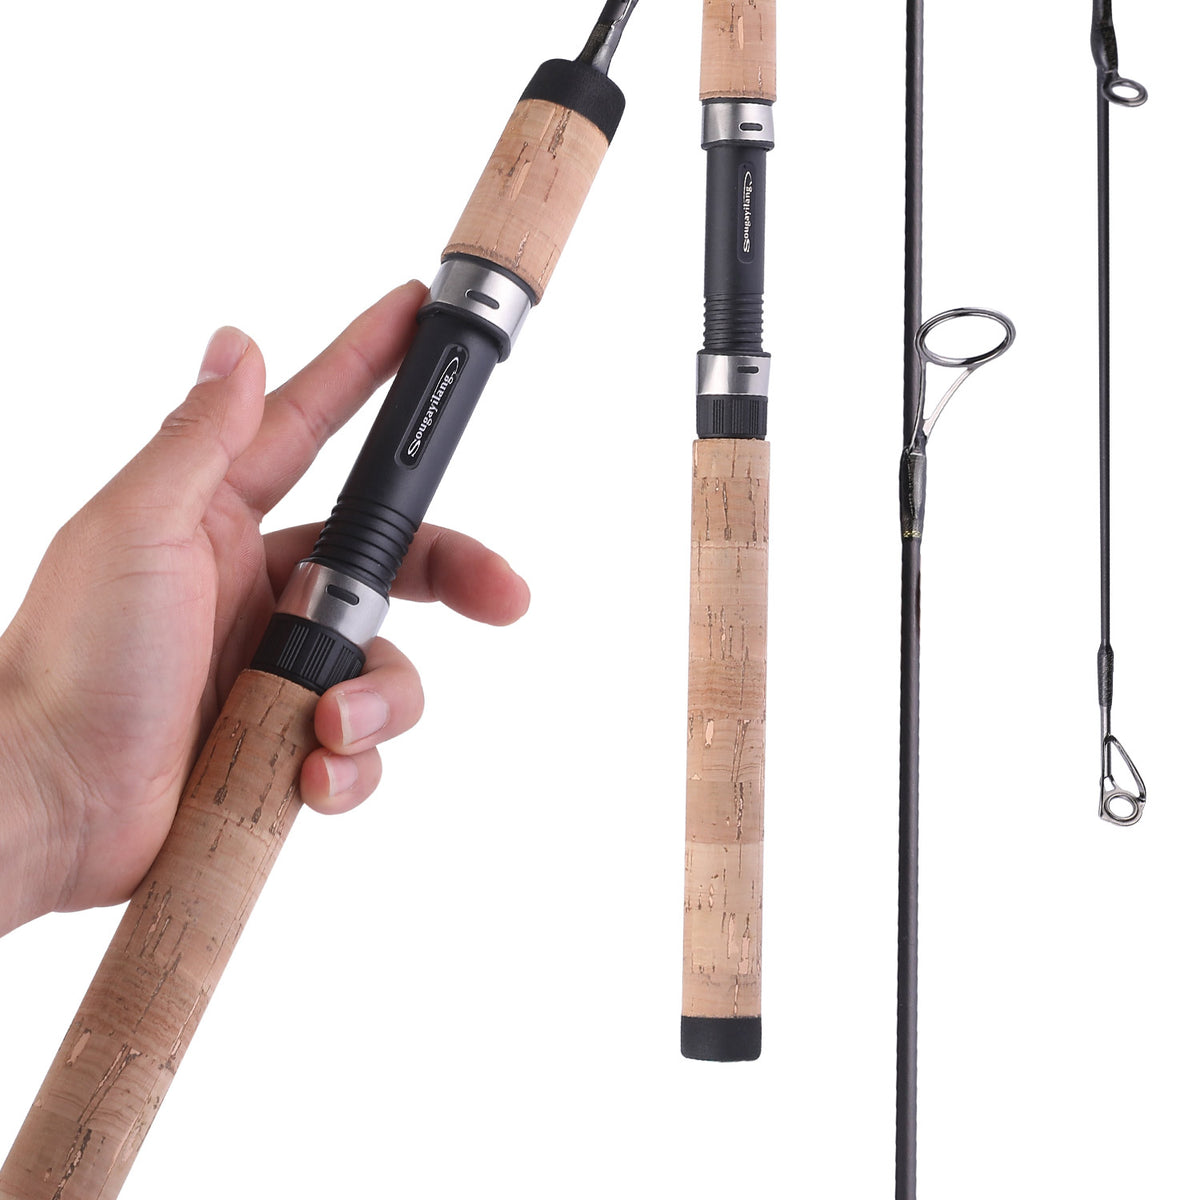 Sougayilang Boat Spinning Rod Lightweight Sensitive Trout, Crappie